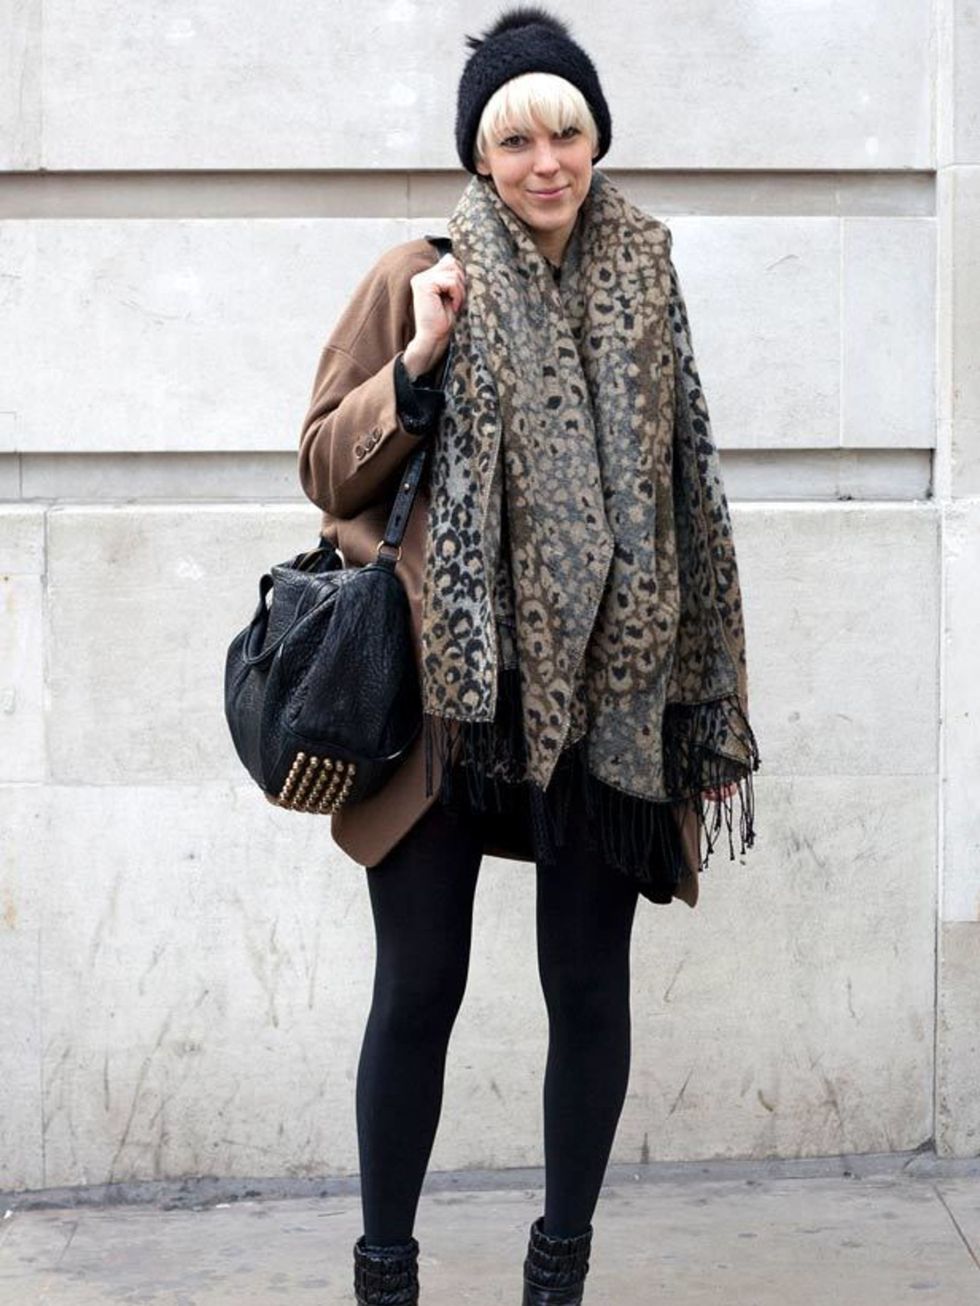 <p>Photo by Silvia Olsen.Anna, 31, Buyer. Topshop jacket, Urban Outfitters hat and scarf, Alexander Wang bag.</p>